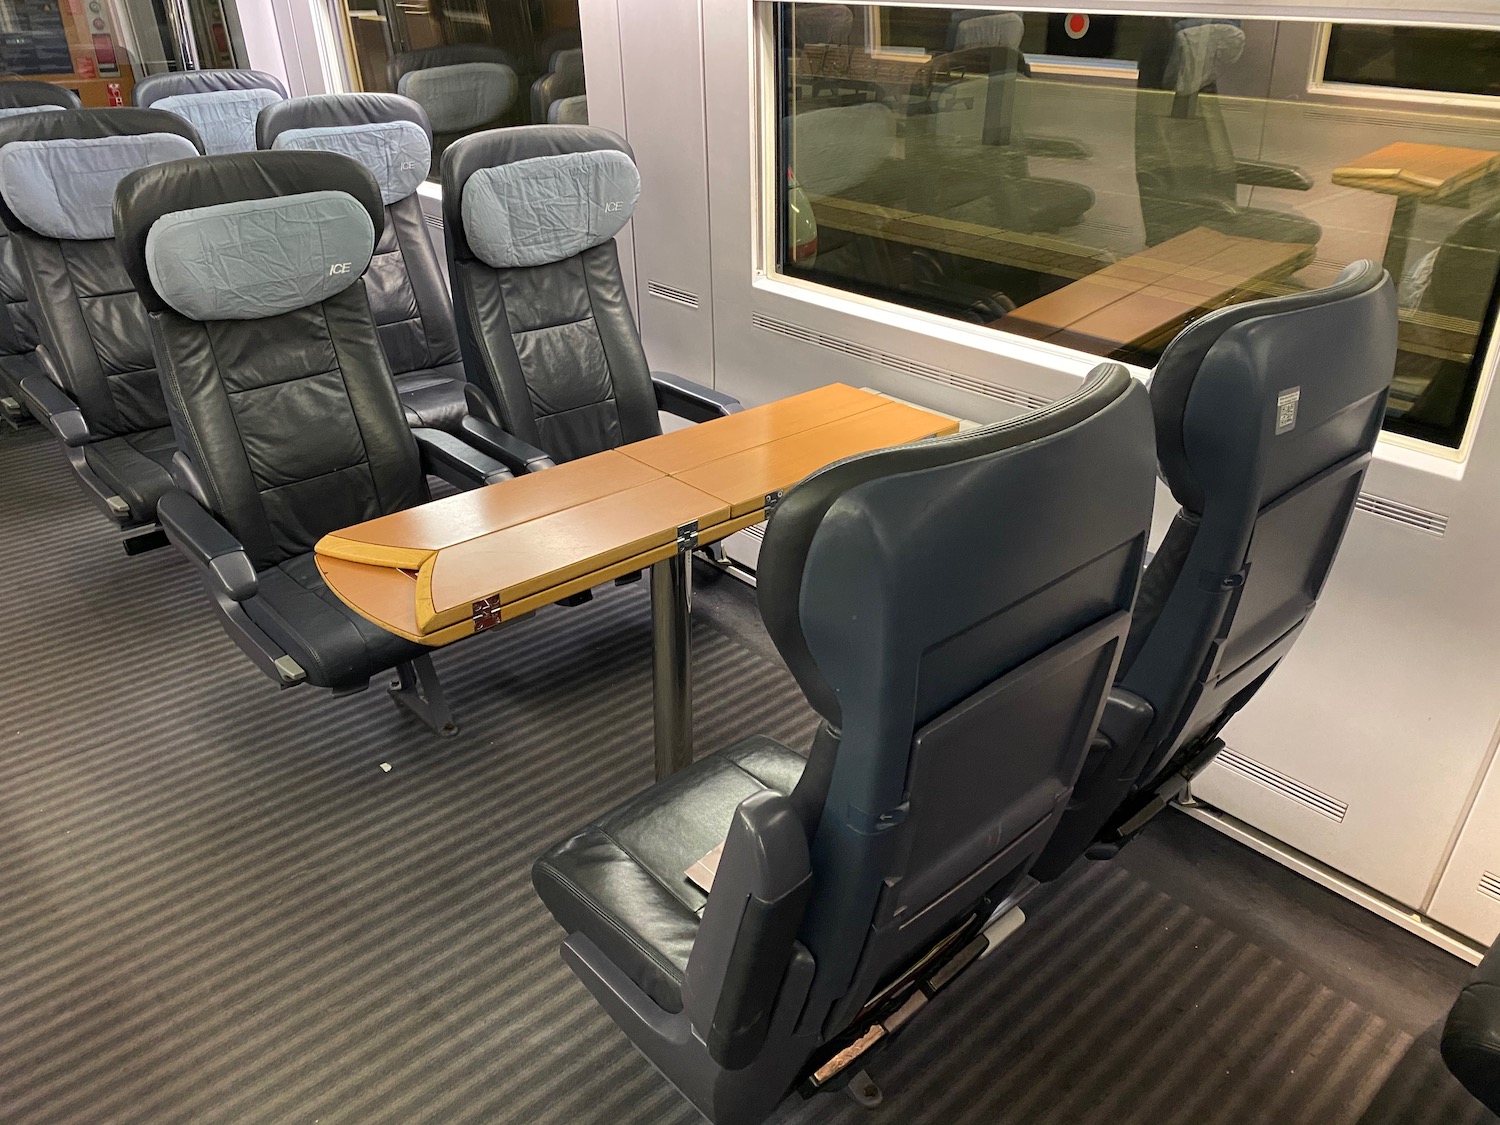 a table in a train